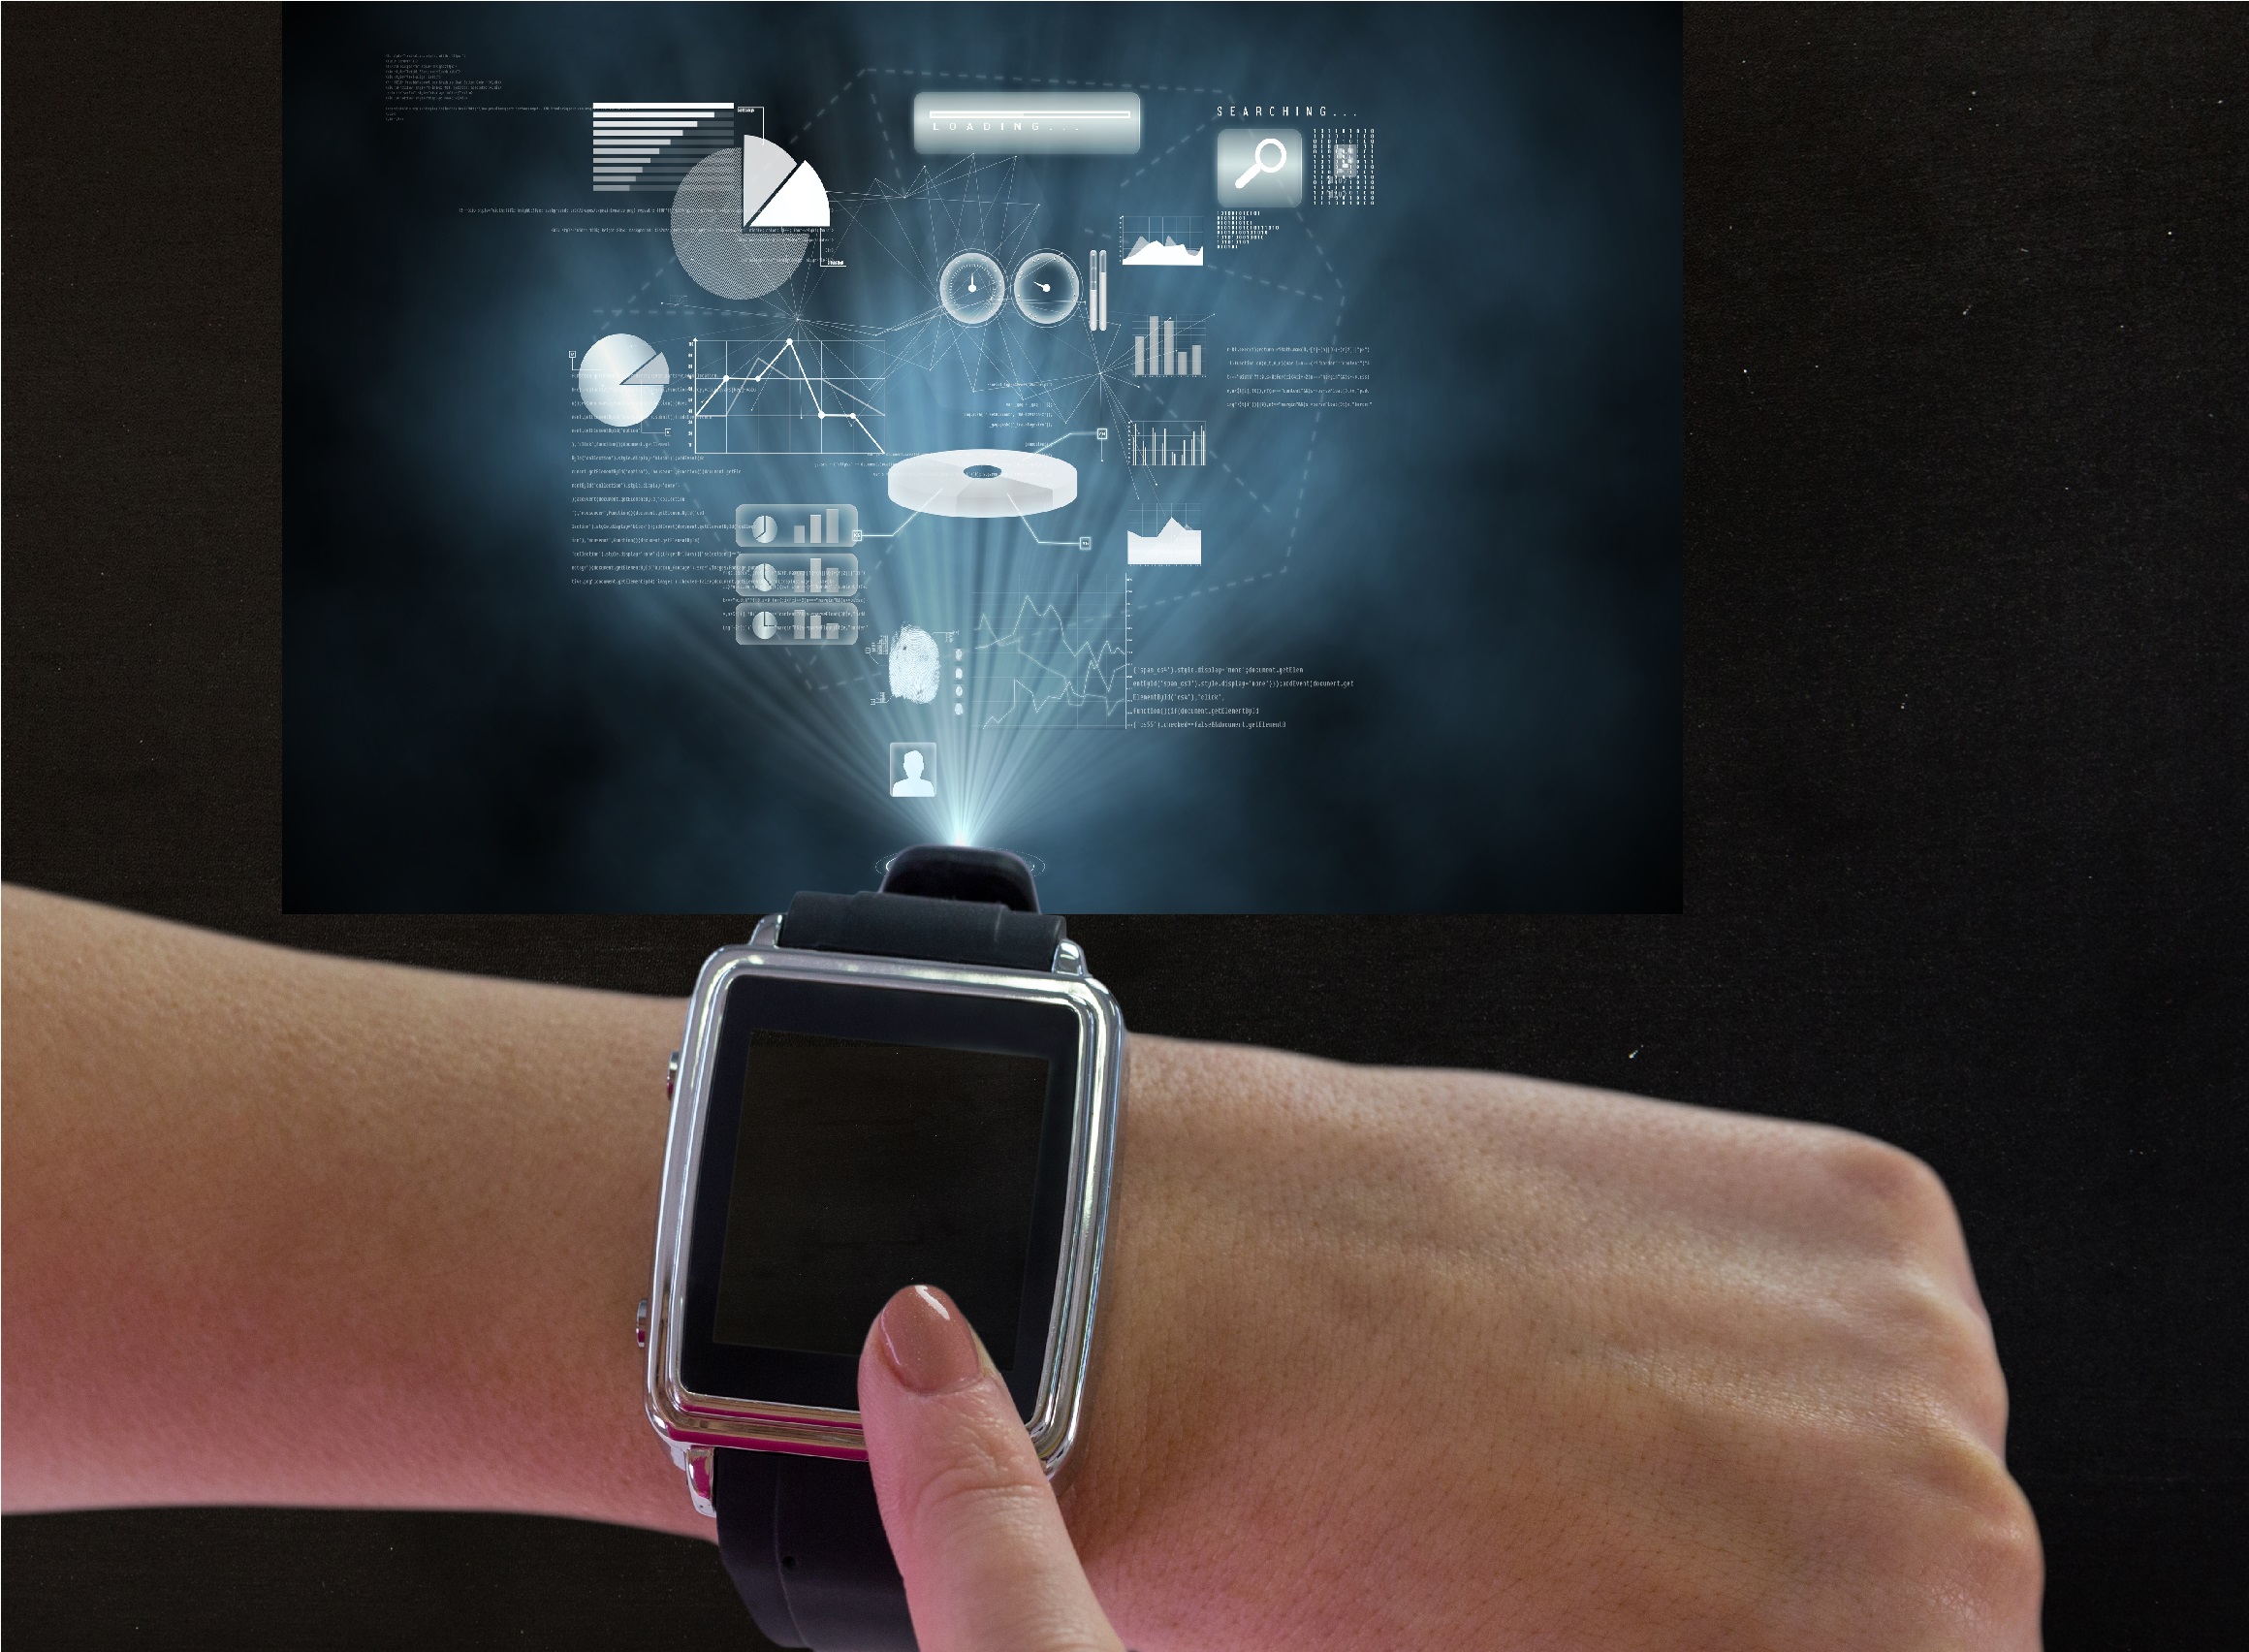 Wearable Tech: Integrating Devices into Our Daily Lives